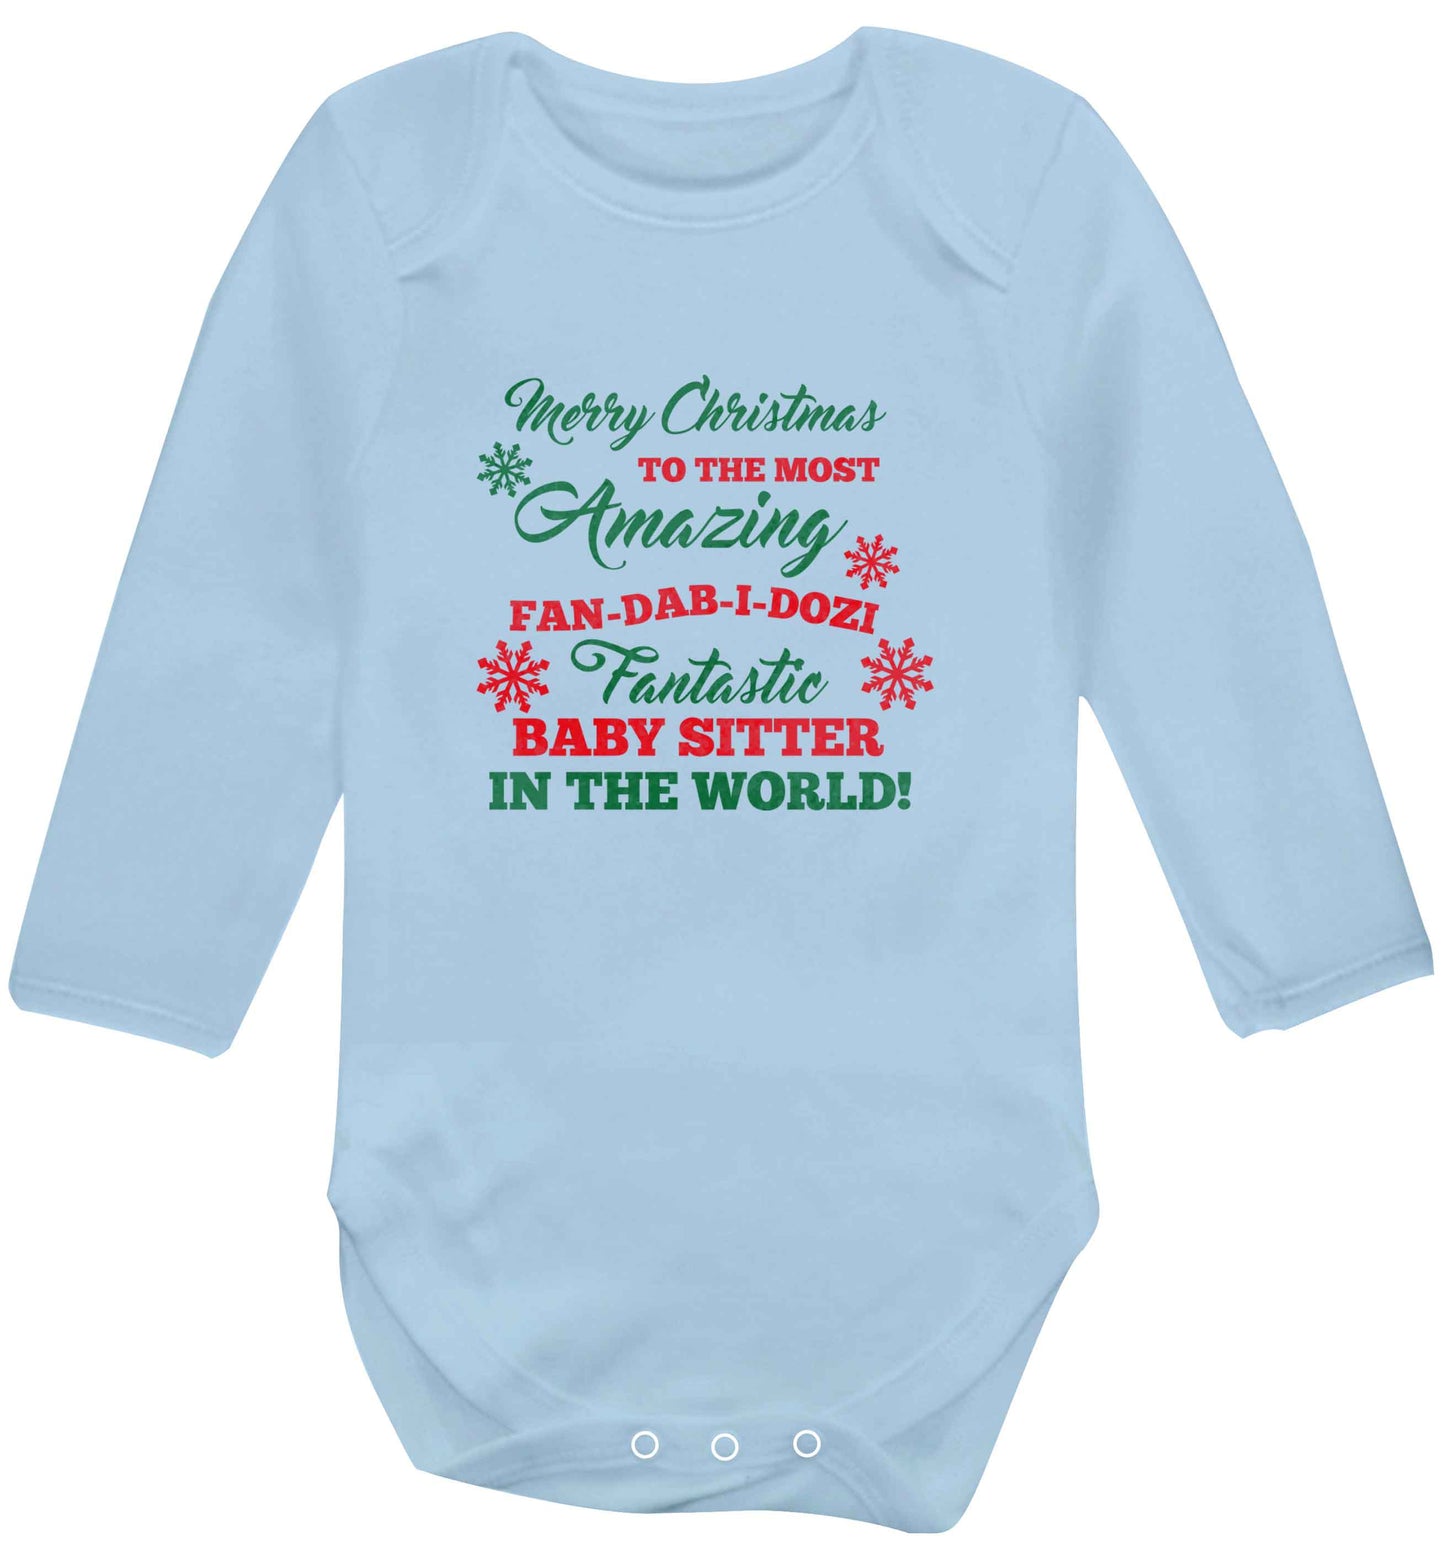 Merry Christmas to the most amazing fan-dab-i-dozi fantasic baby sitter in the world baby vest long sleeved pale blue 6-12 months